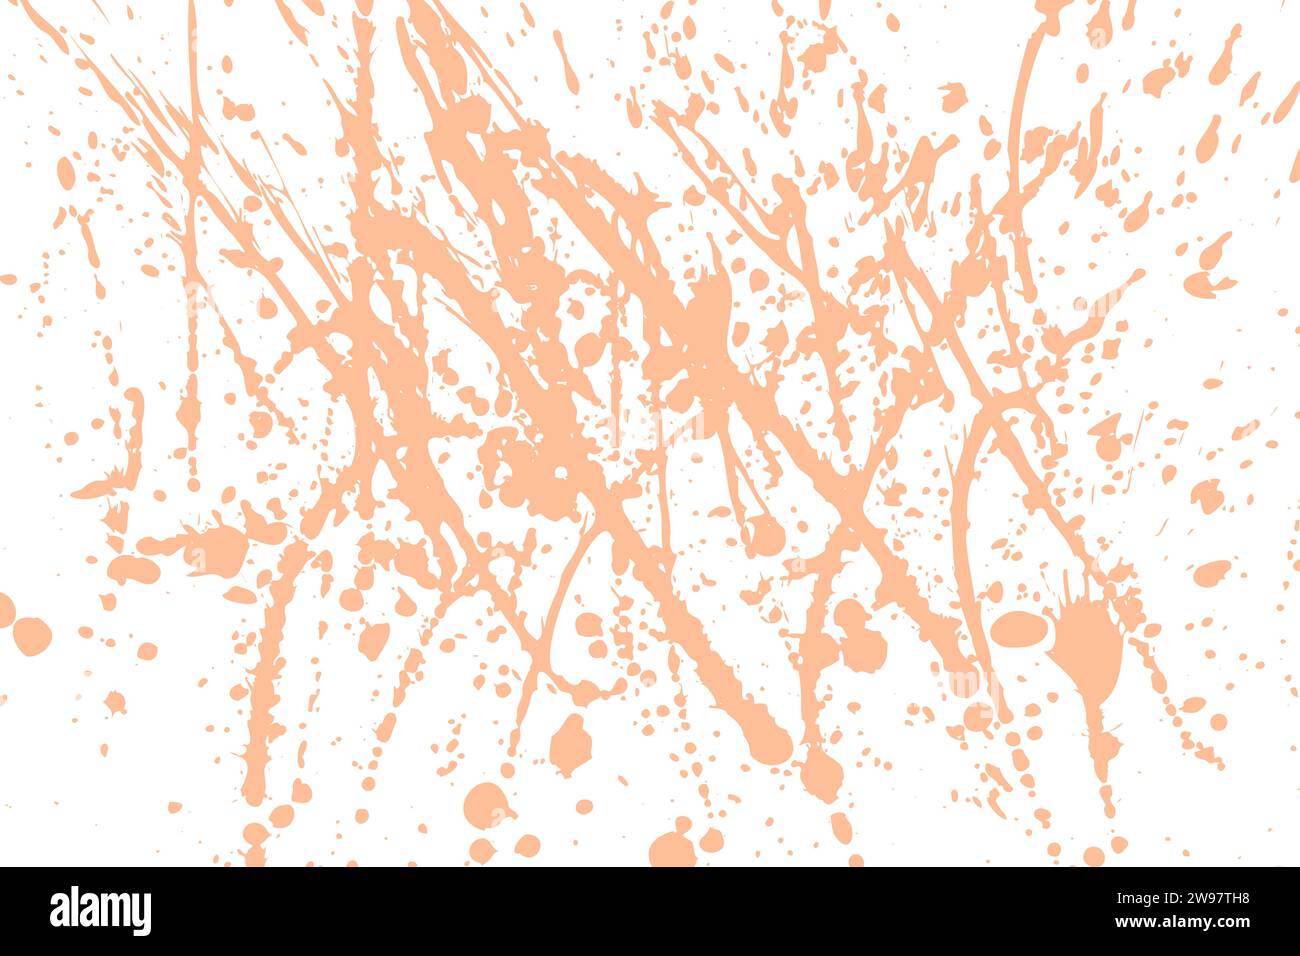 Abstract vector grunge illustration. Peach fuzz splashes of paint on a white background. Stains, drops, spots, ink prints. Messy handcrafted texture b Stock Vector